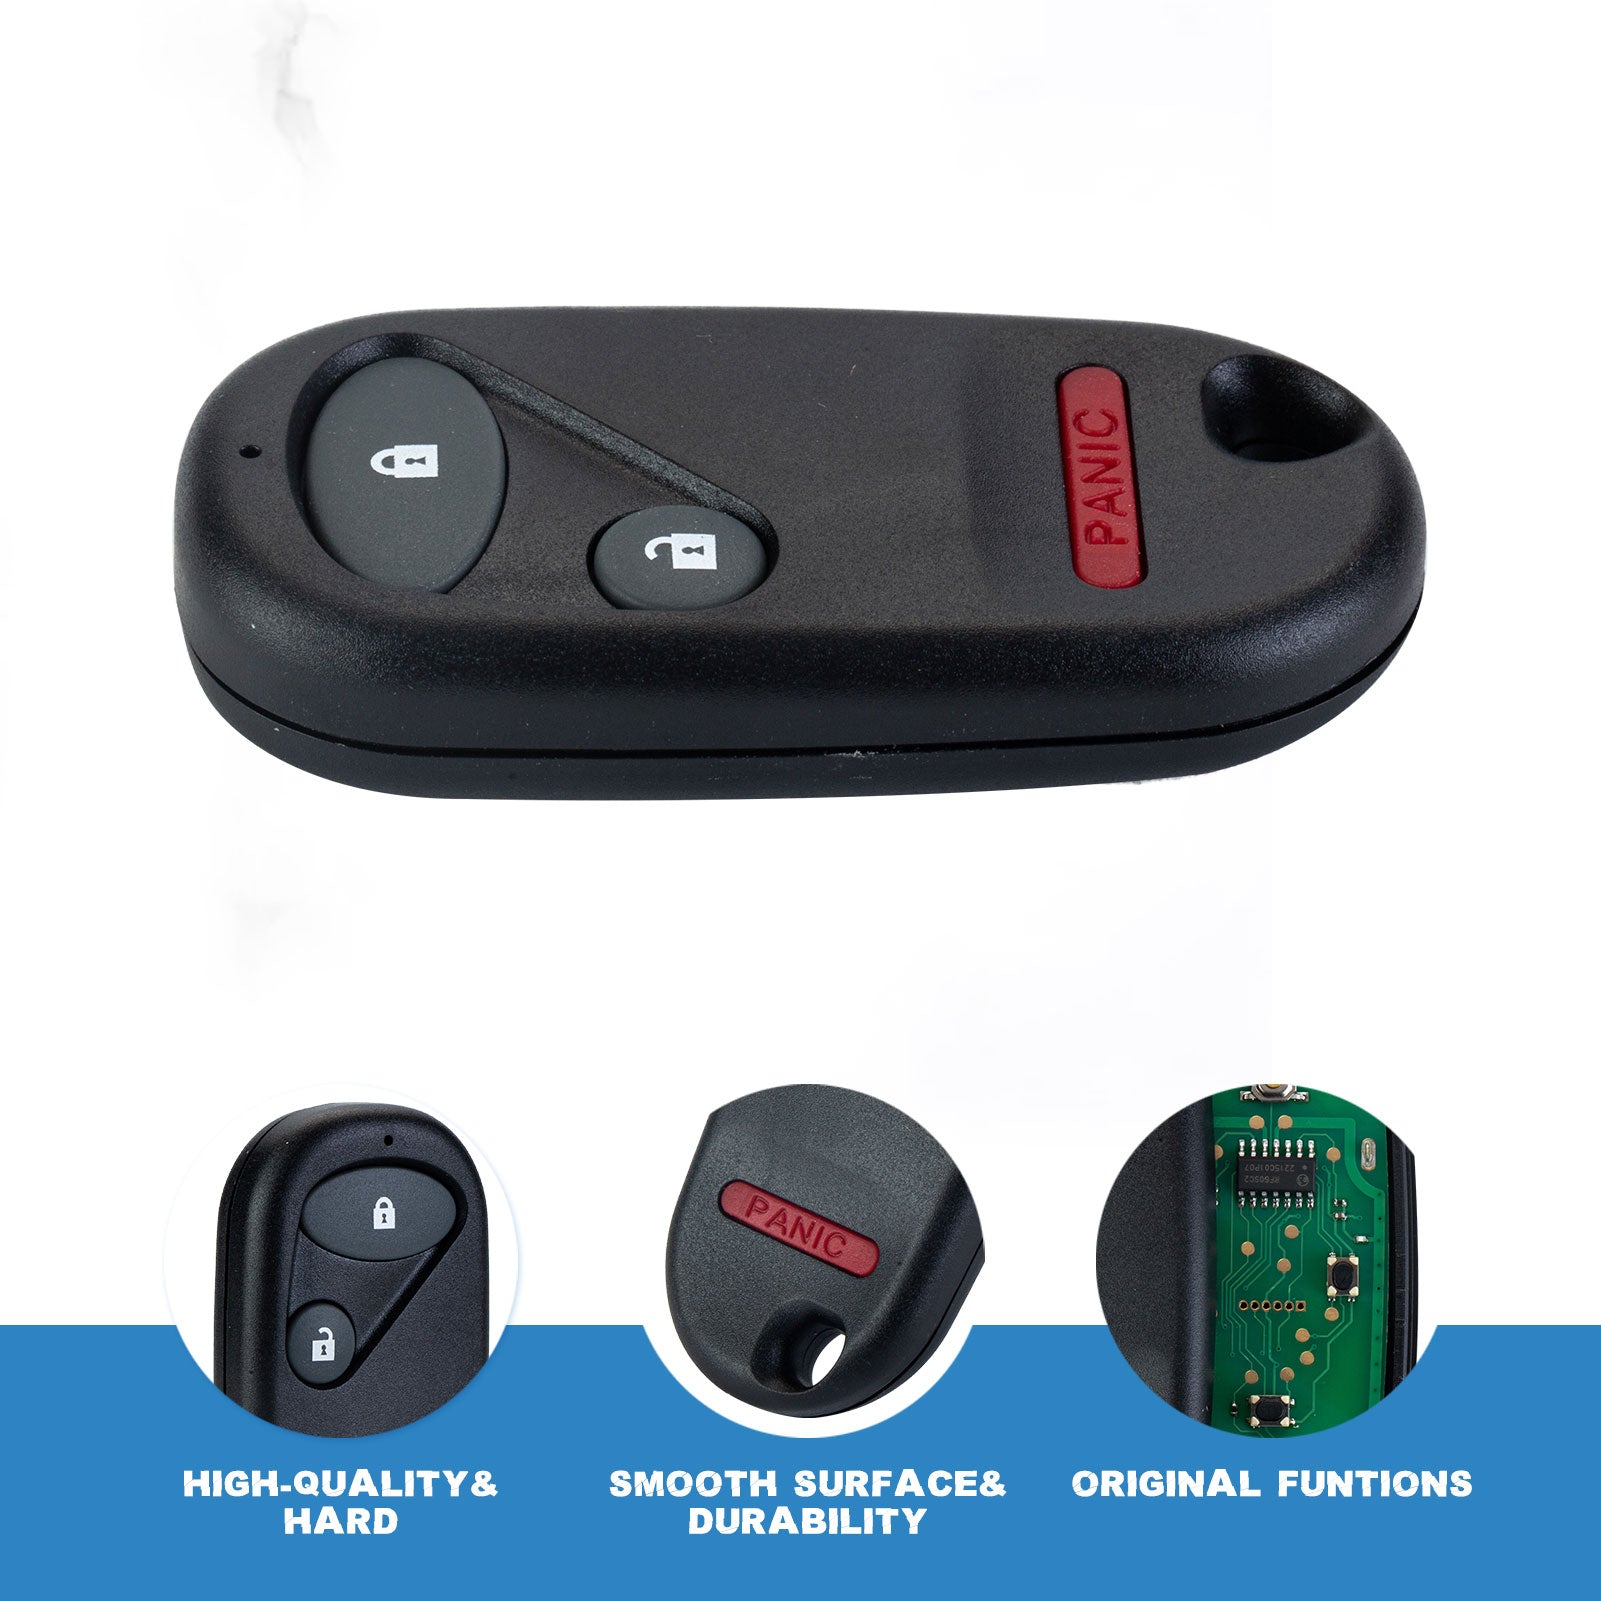 Keyless Entry Remote Control with Uncut High Security Car Key Fob Repalcement for 2002 2003 2004 Honda CR-V OUCG8D-344H-A  KR-H3RA